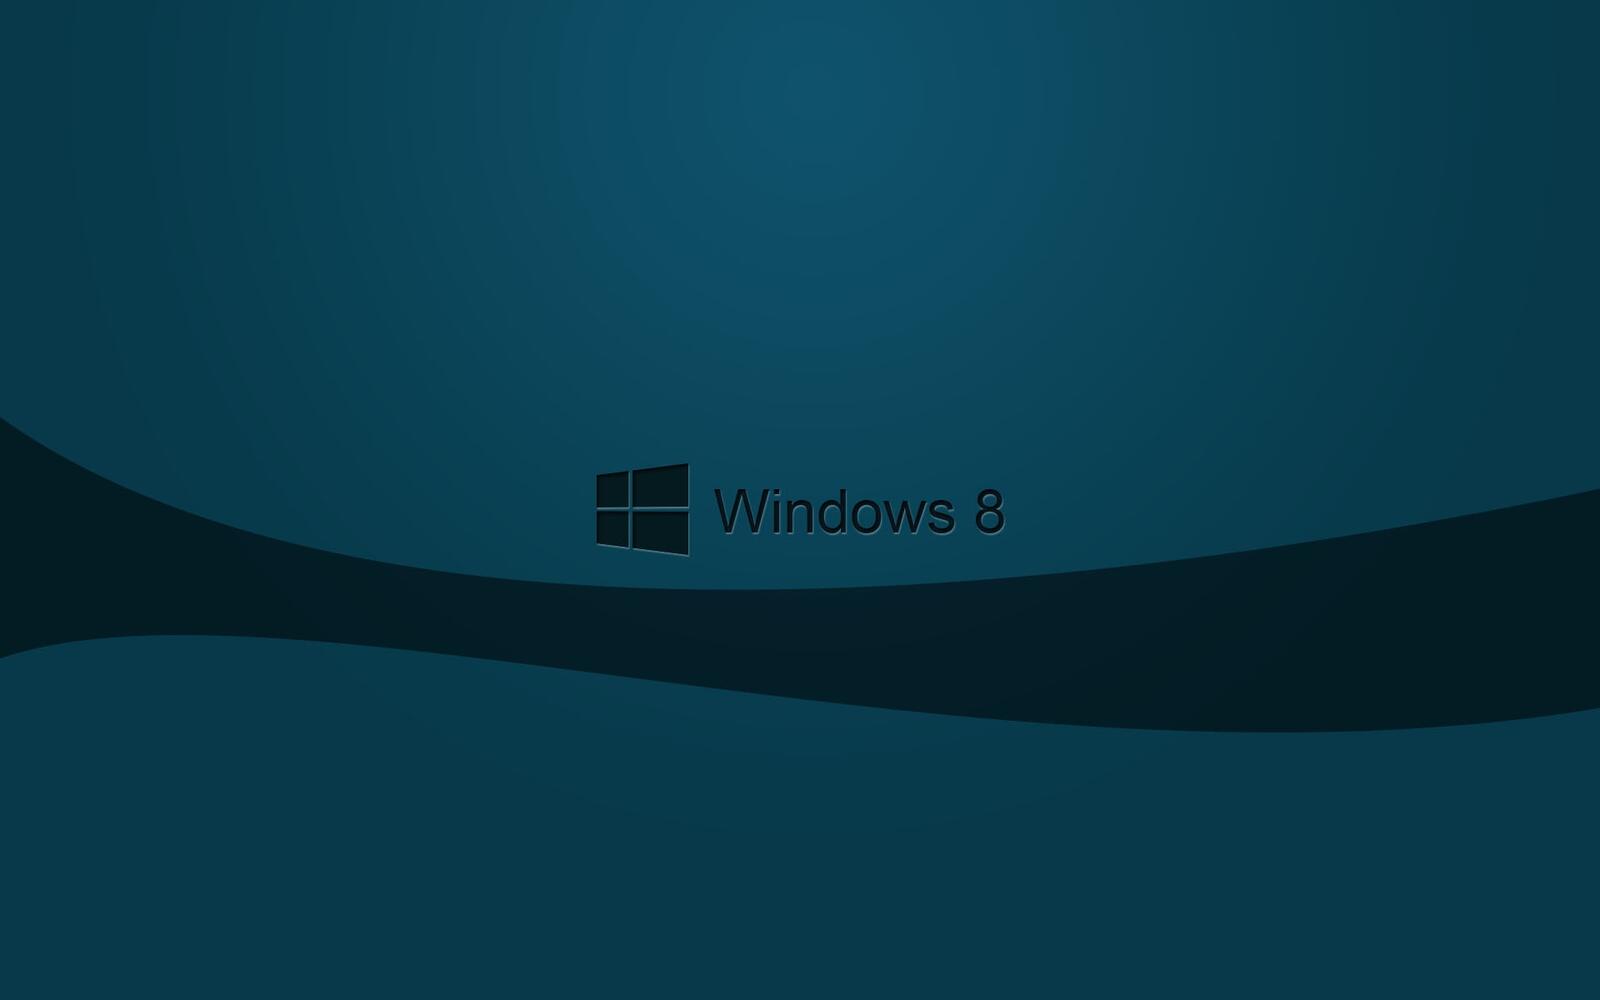 Wallpapers windows 8 operating system screen saver on the desktop